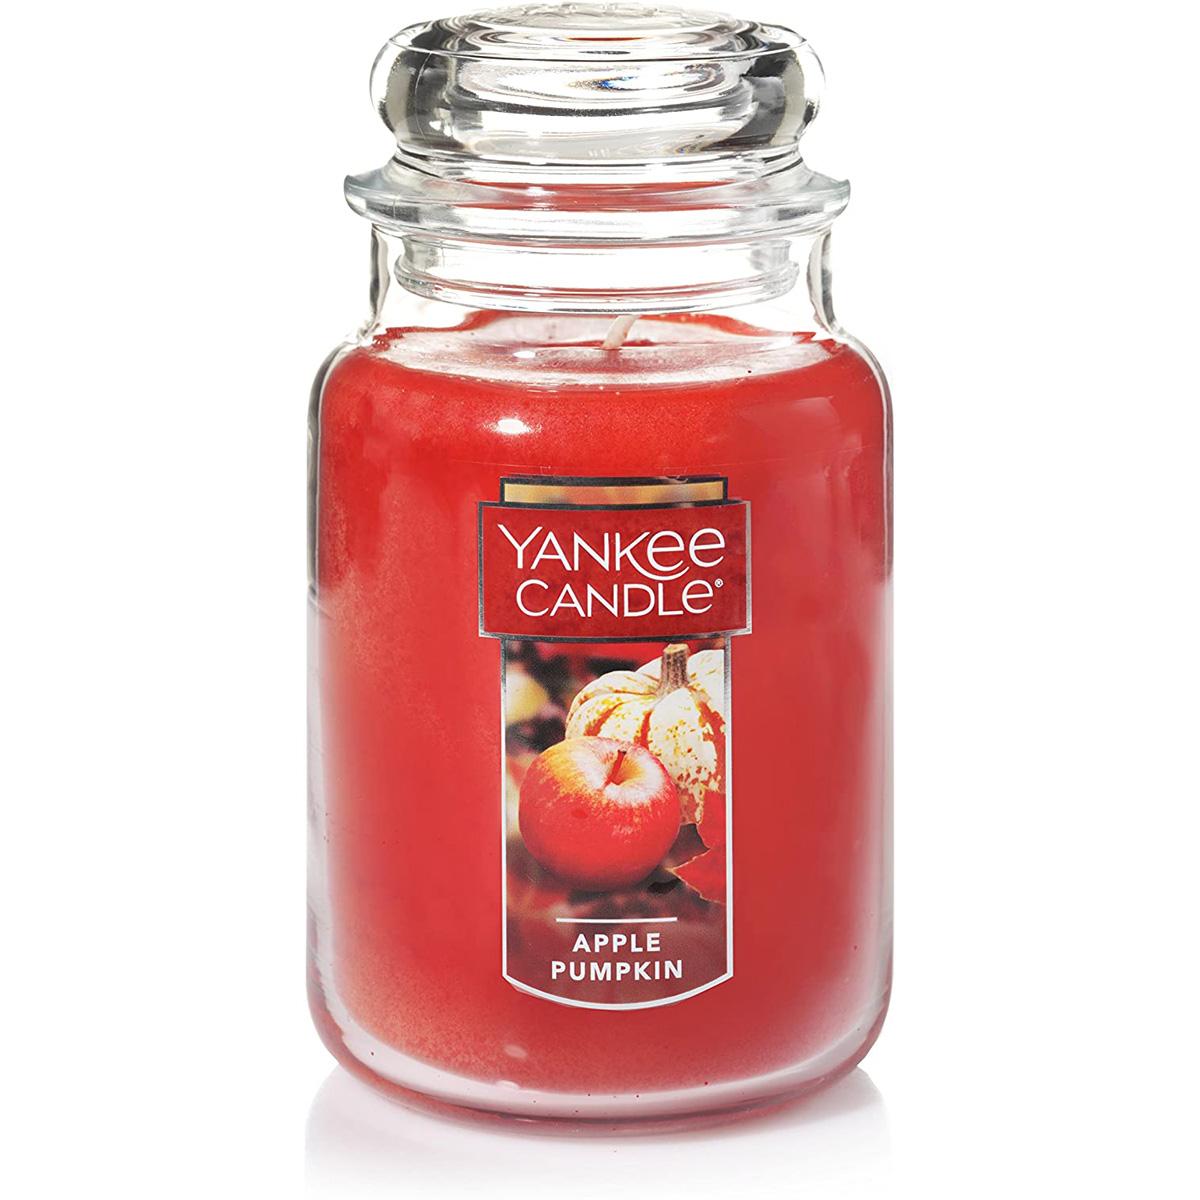 Yankee Candle Apple Pumpkin Scent Large Jar Candle for $11